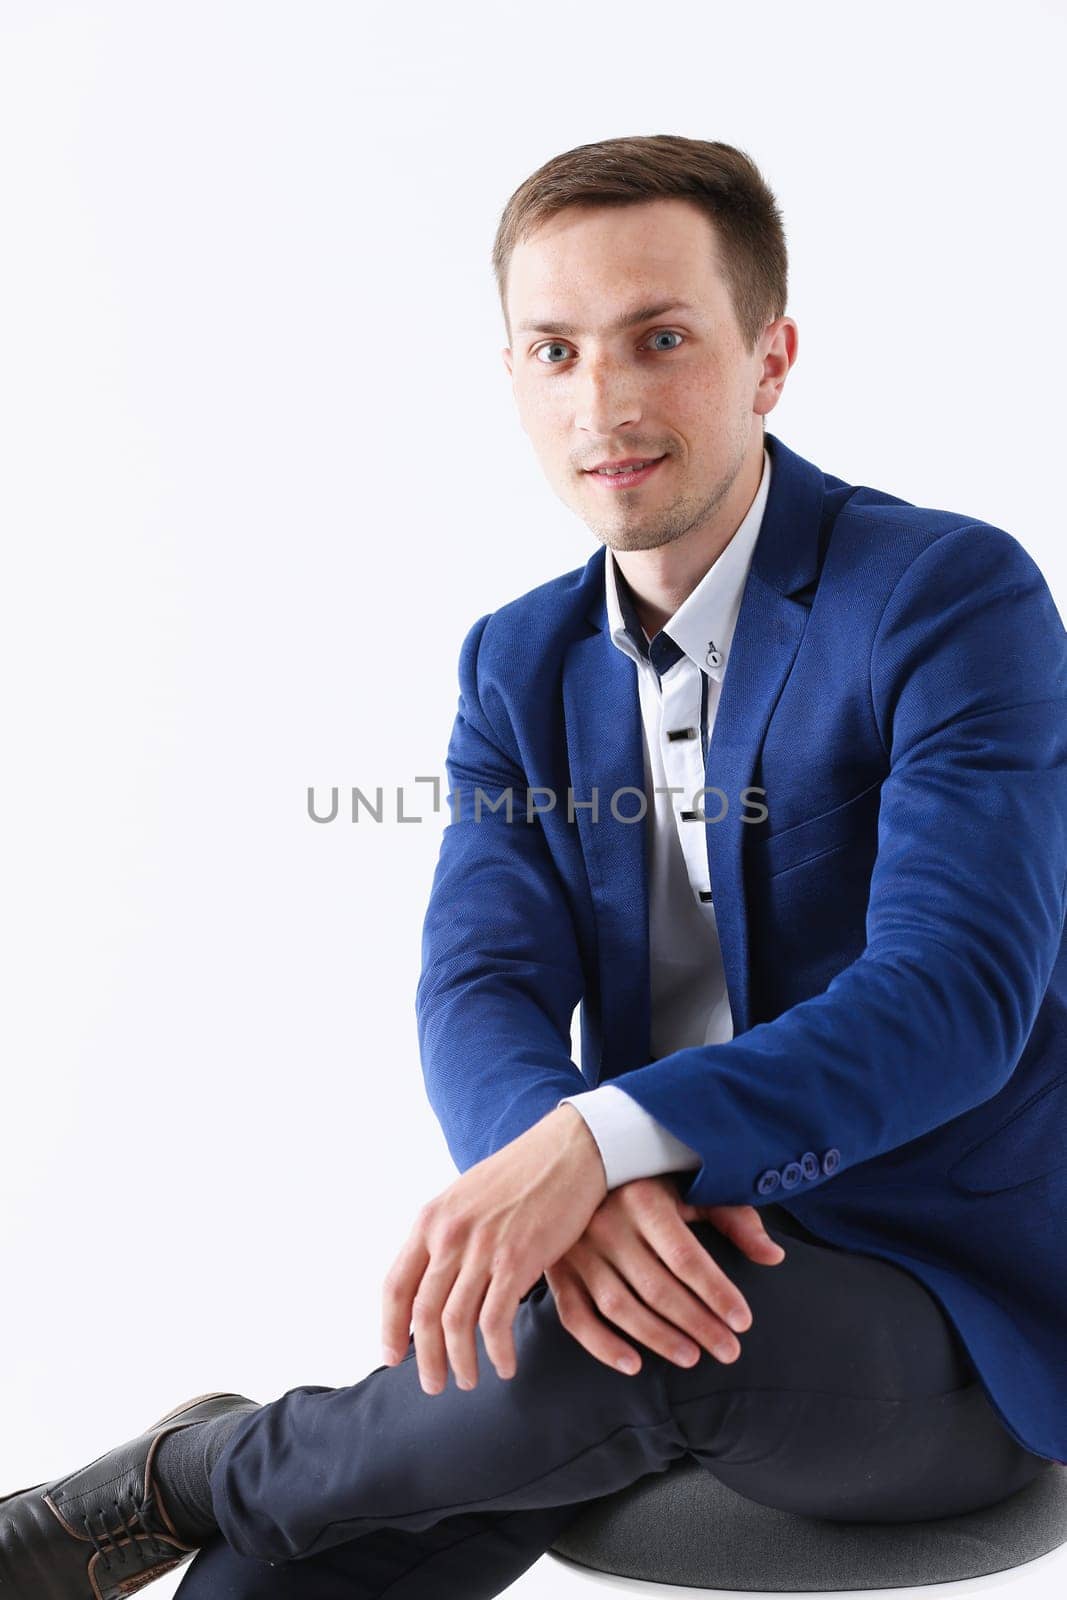 Handsome smiling man in suit and tie looking by kuprevich